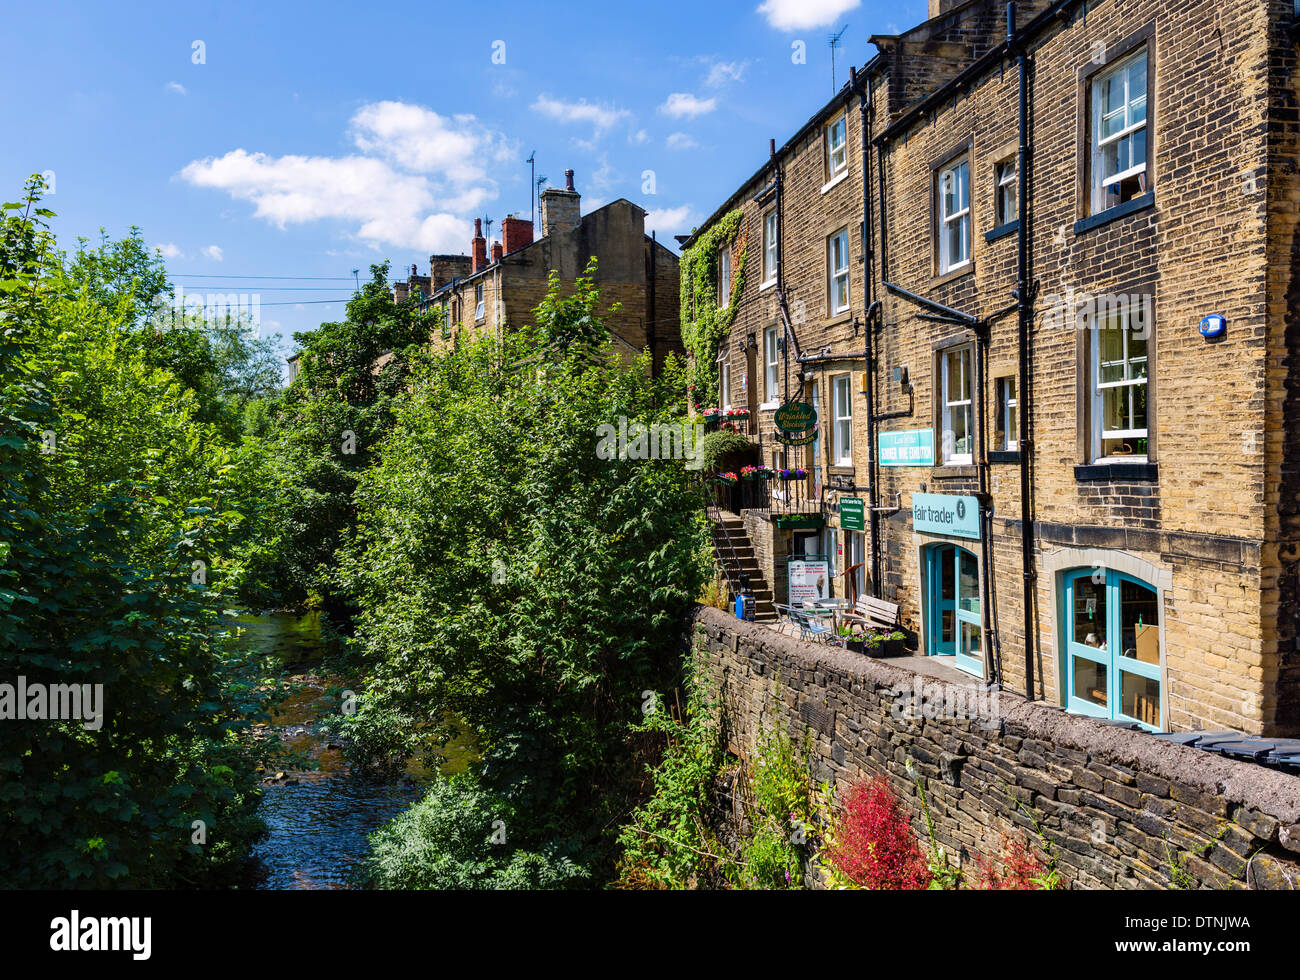 River Holme and Wrinkled Stocking Cafe (Compo's house in Last of the Summer Wine), Holmfirth, West Yorkshire, England, UK Stock Photo